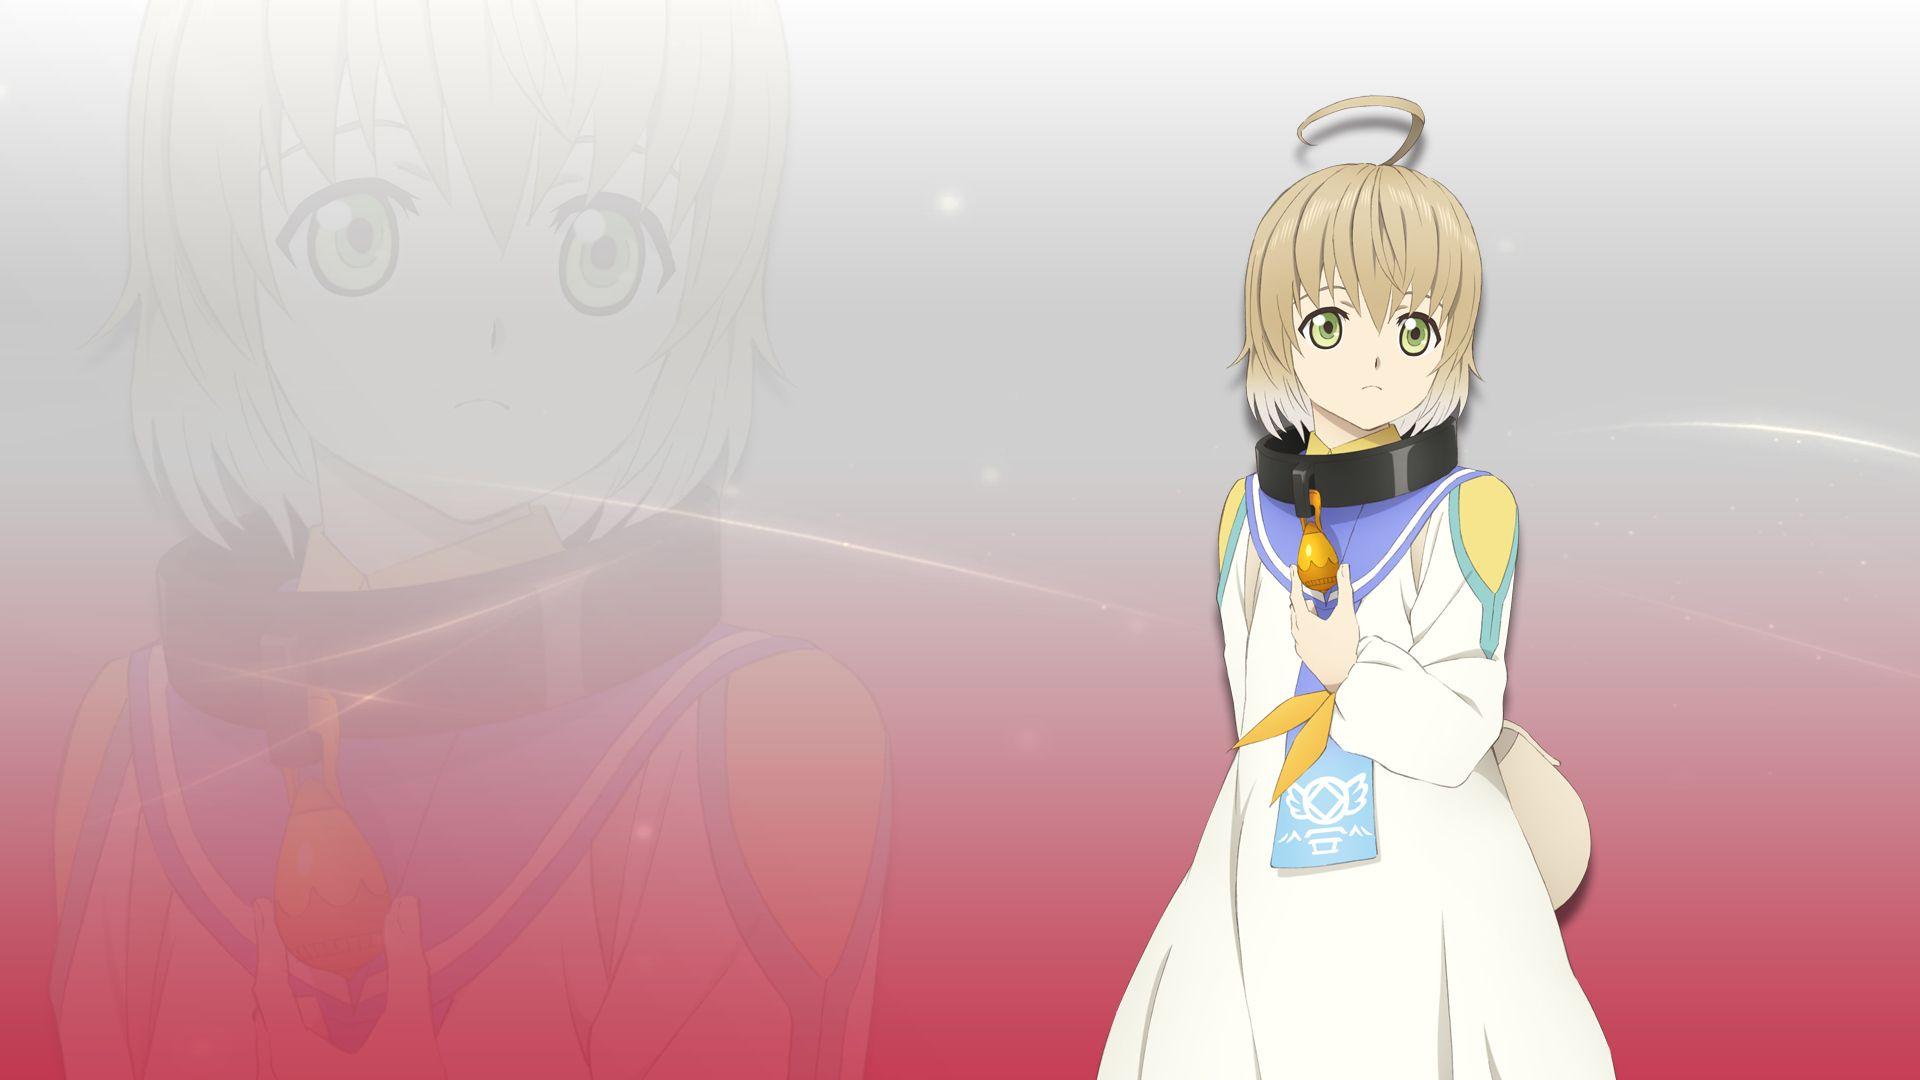 Laphicet. Wallpaper from Tales of Berseria